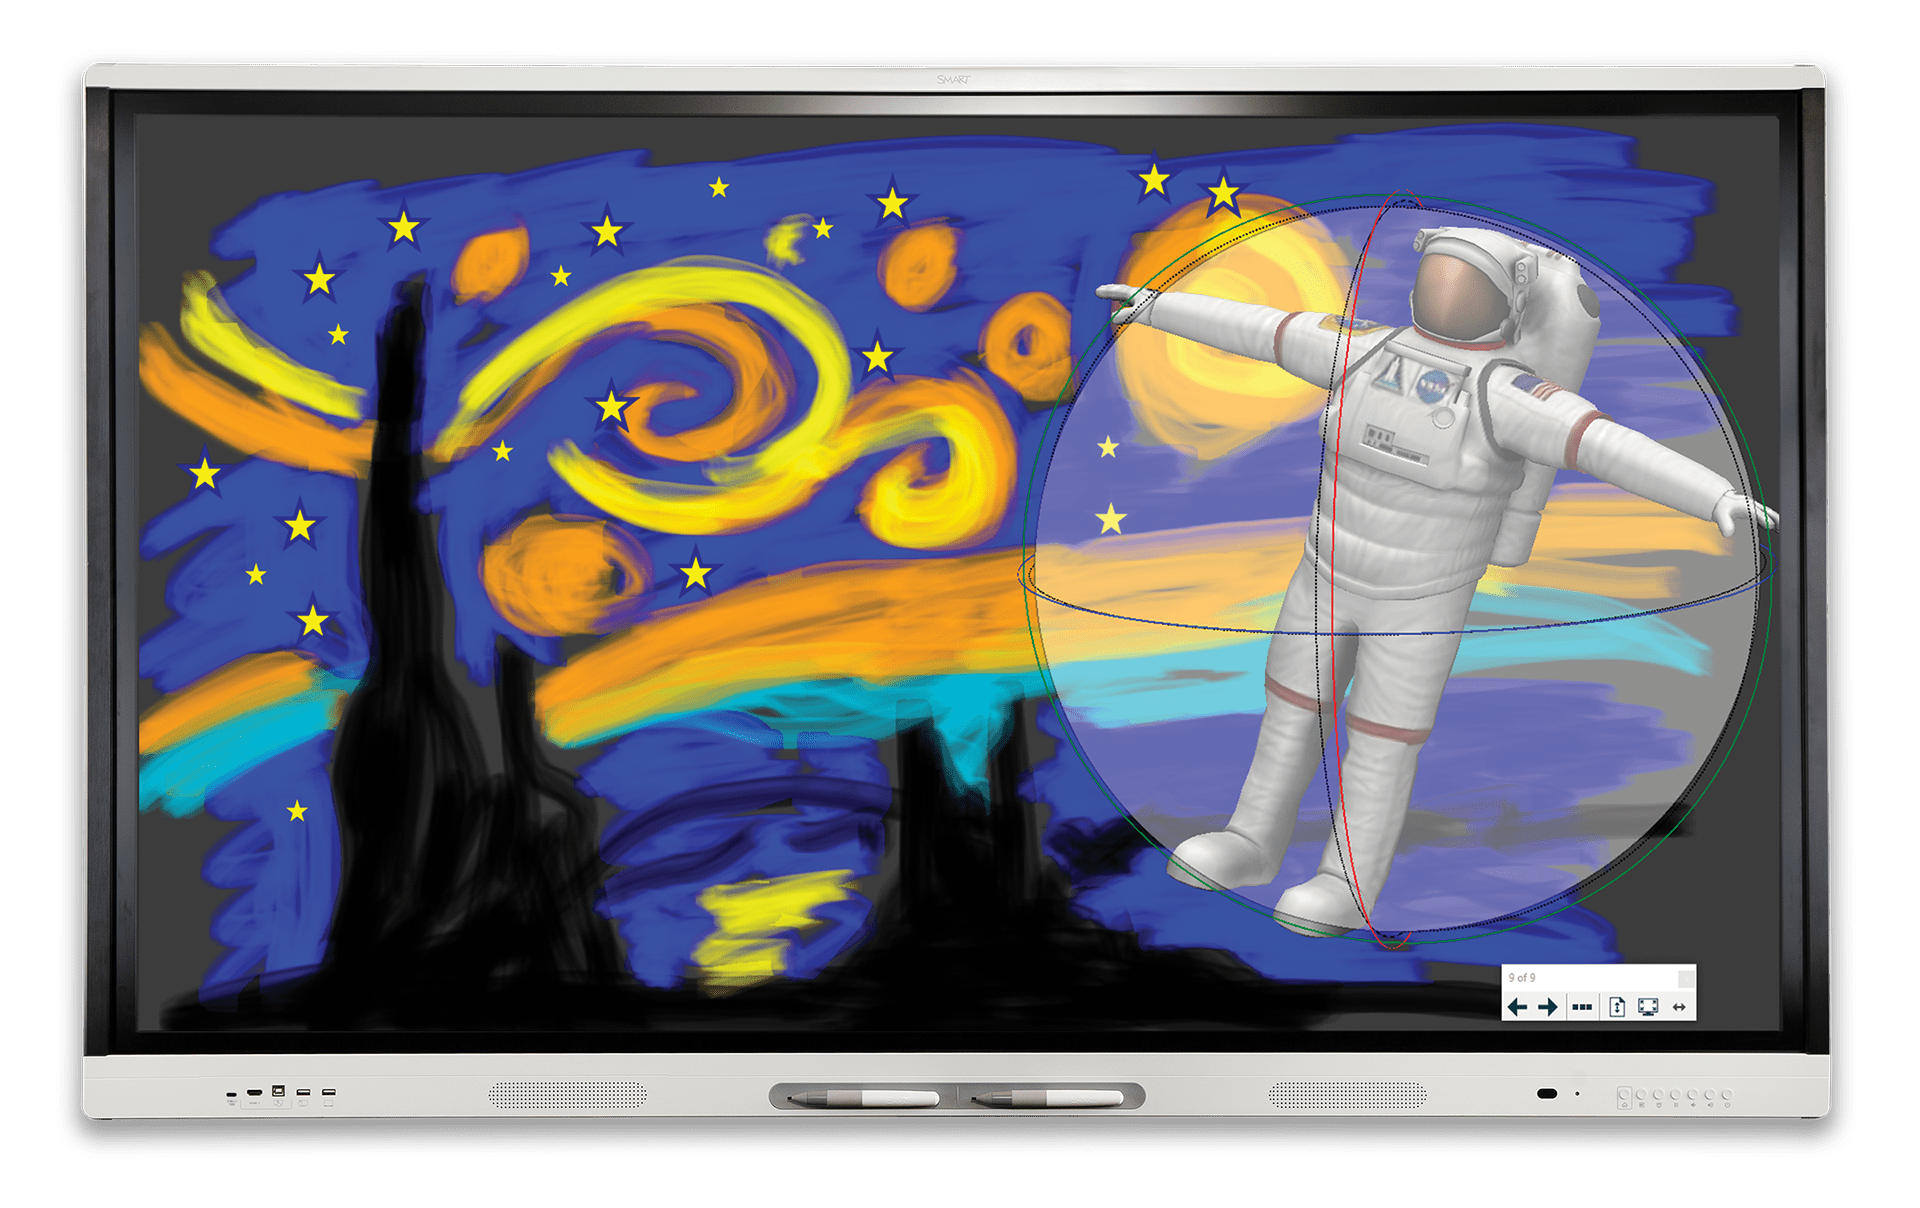 Digital illustration of an astronaut floating in space with stars and swirls on an interactive SMART Board.